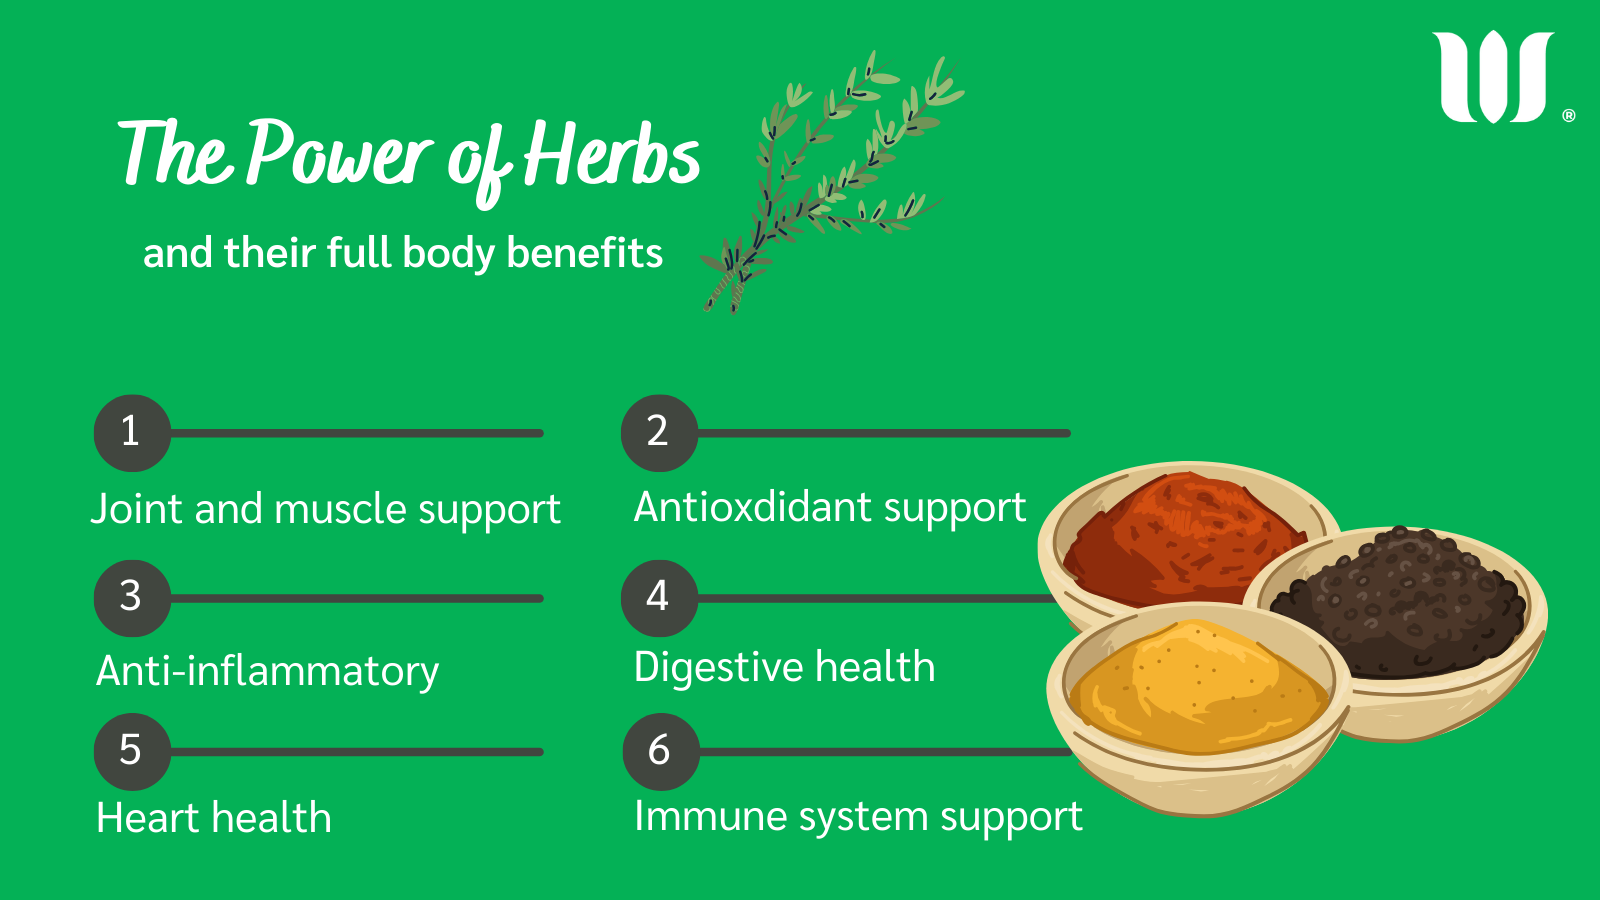 The power of herbs